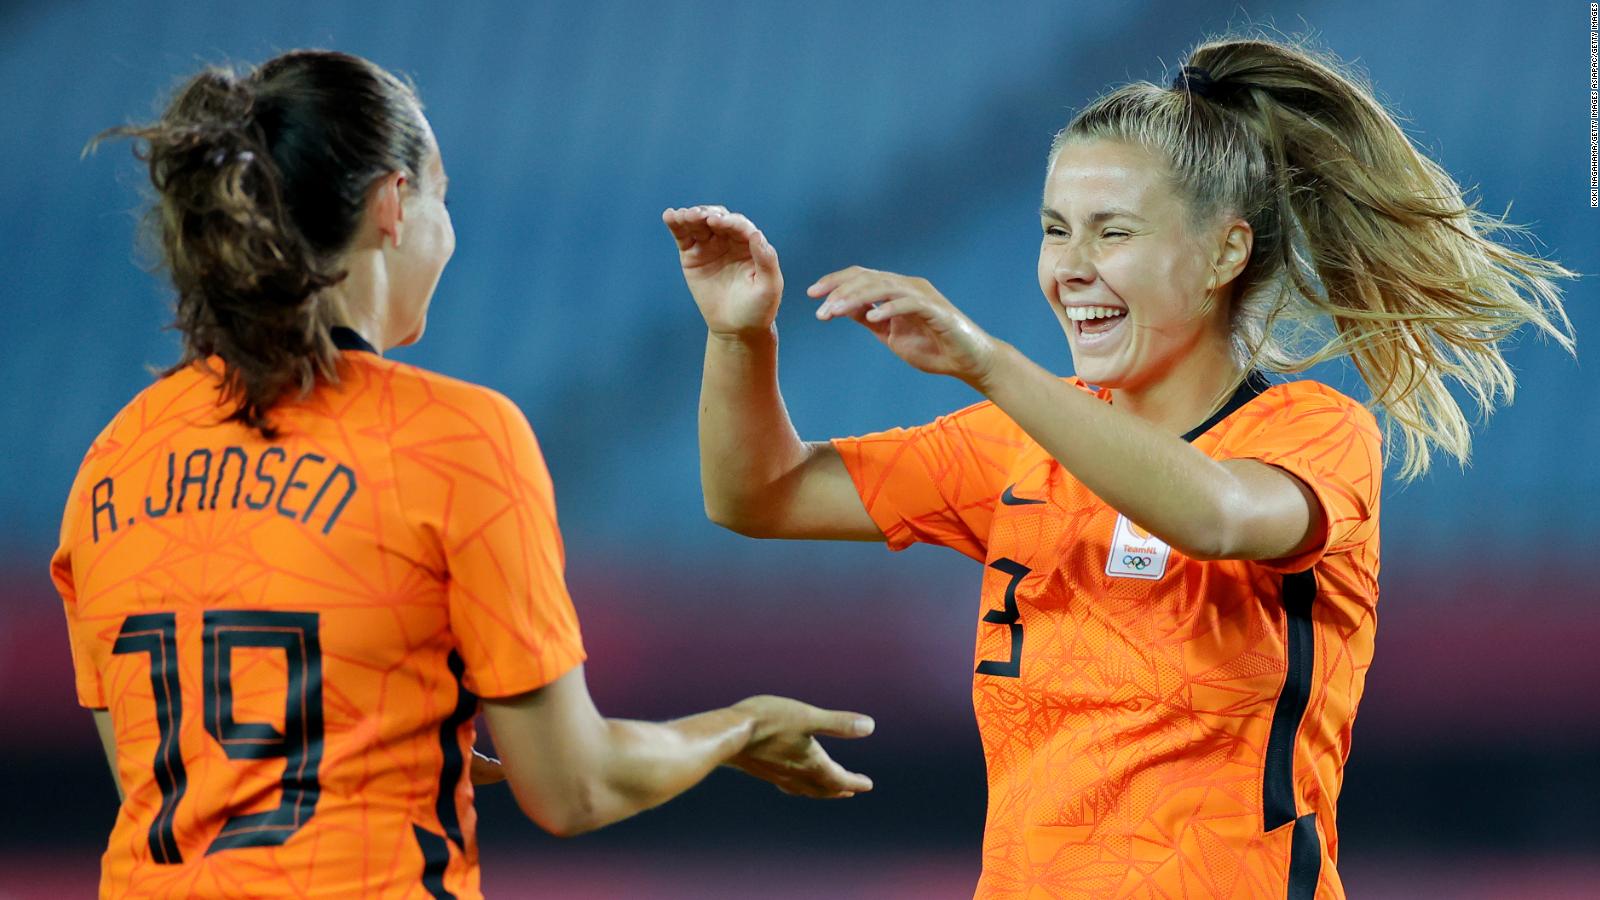 Netherlands thrashes Zambia 10-3 in women's football tournament to set ...